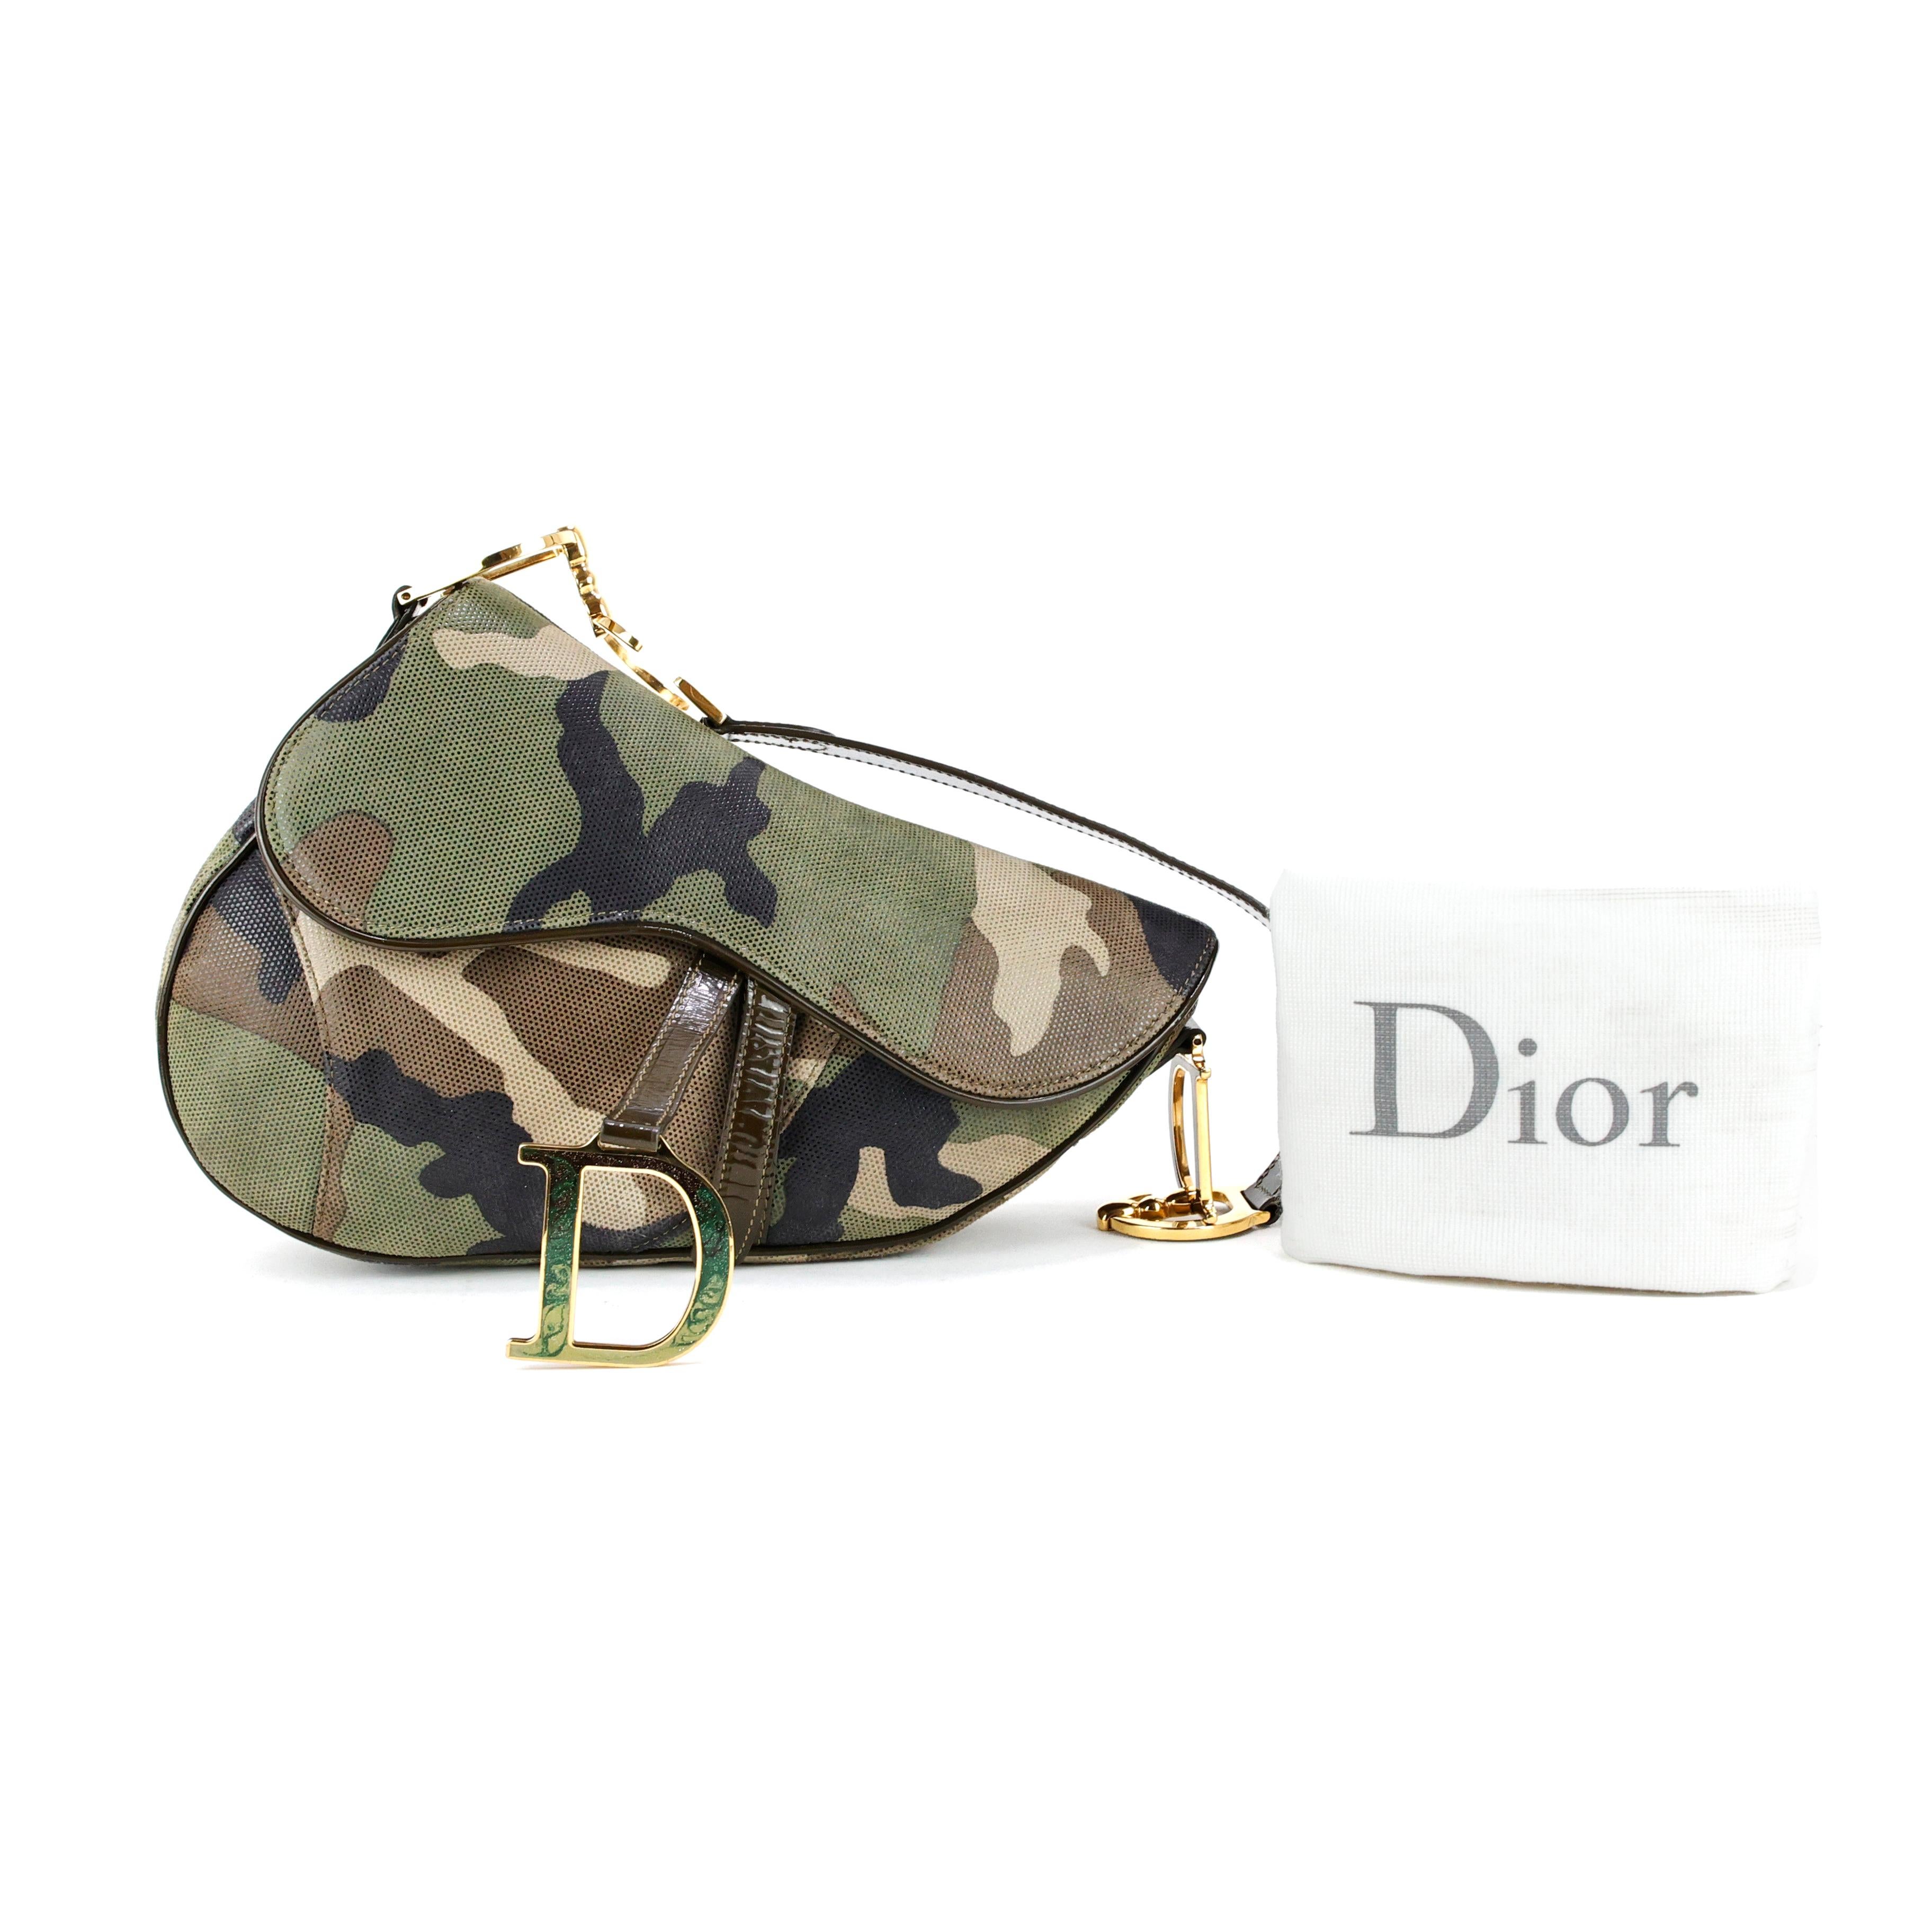 Christian Dior by John Galliano 2000s Camouflage Saddle bag For Sale 2